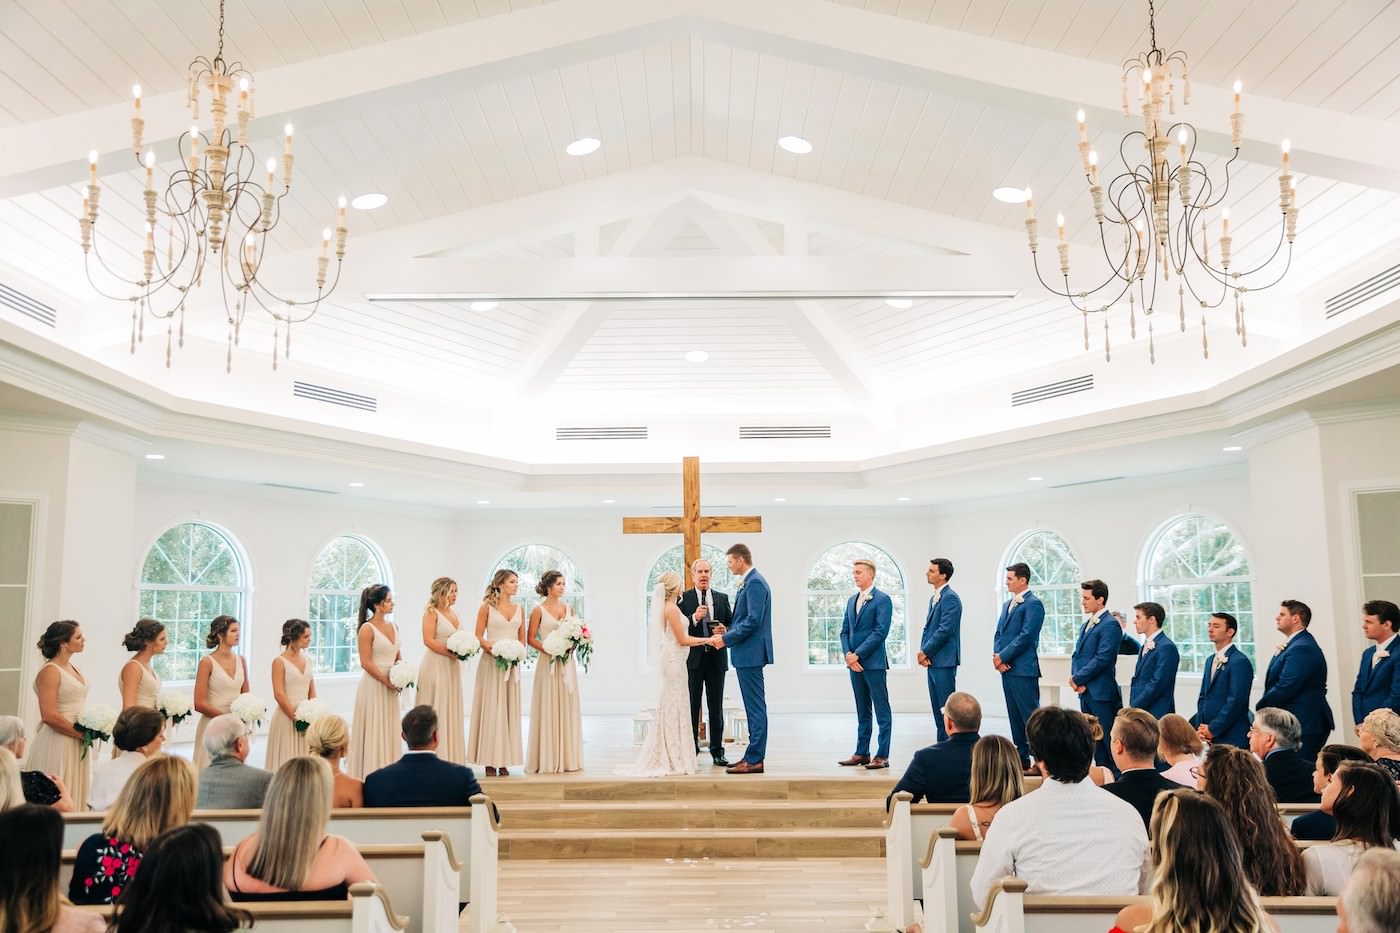 Safety Harbor Wedding Venue Harborside Chapel | Indoor Traditional Church Wedding Ceremony Pews with Cross Backdrop | Nude Champagne Neutral Bridesmaids Dresses with White Hydrangea Bouquets | Navy Blue Groom and Groomsmen Suits